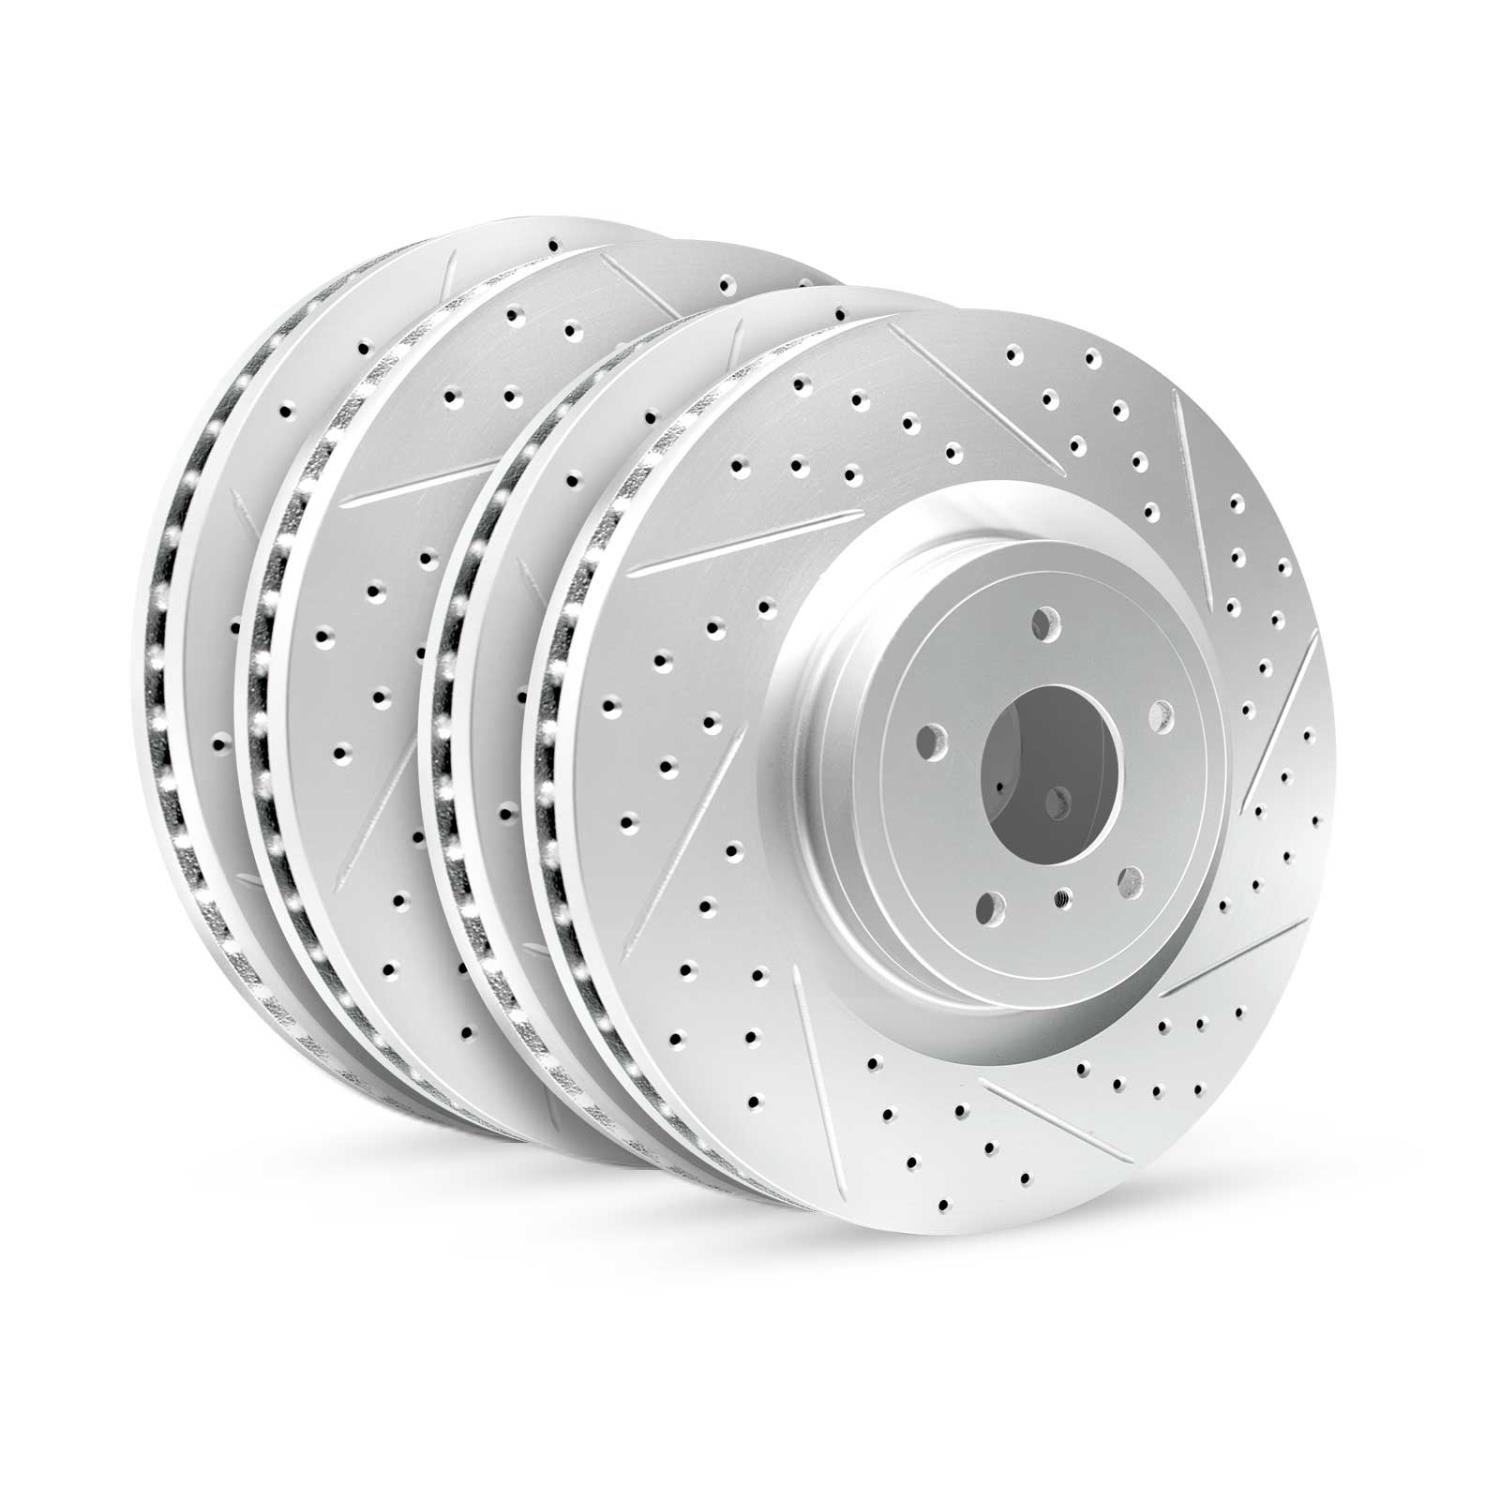 GEO-Carbon Drilled/Slotted Rotors, 2014-2016 Kia/Hyundai/Genesis, Position: Front/Rear